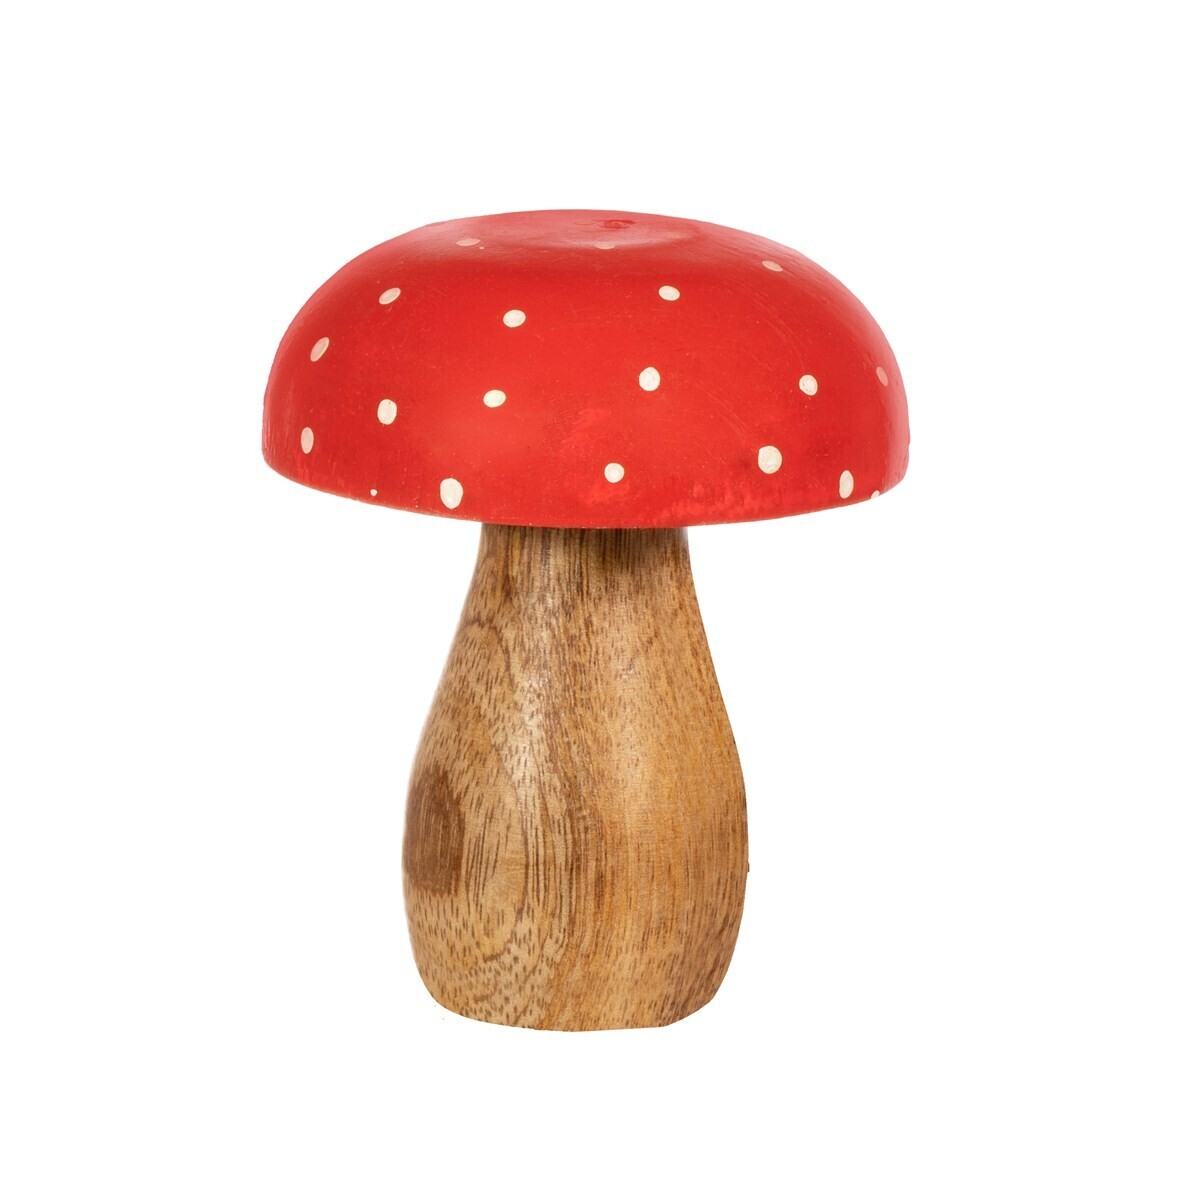 Red and White Wooden Mushroom Standing Decoration